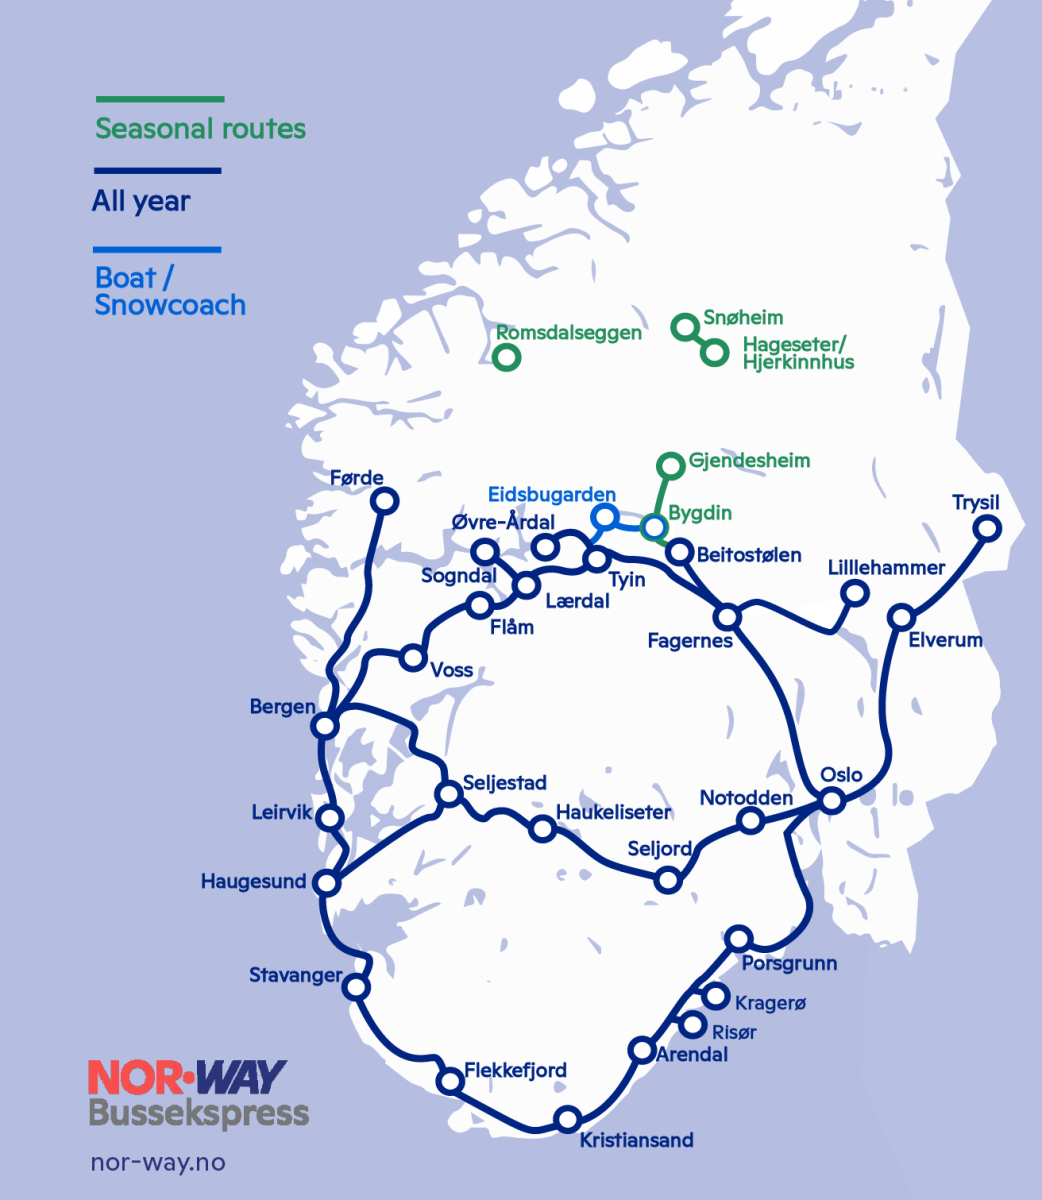 Illustration of the bus routes from NOR-WAY Bussekspress.